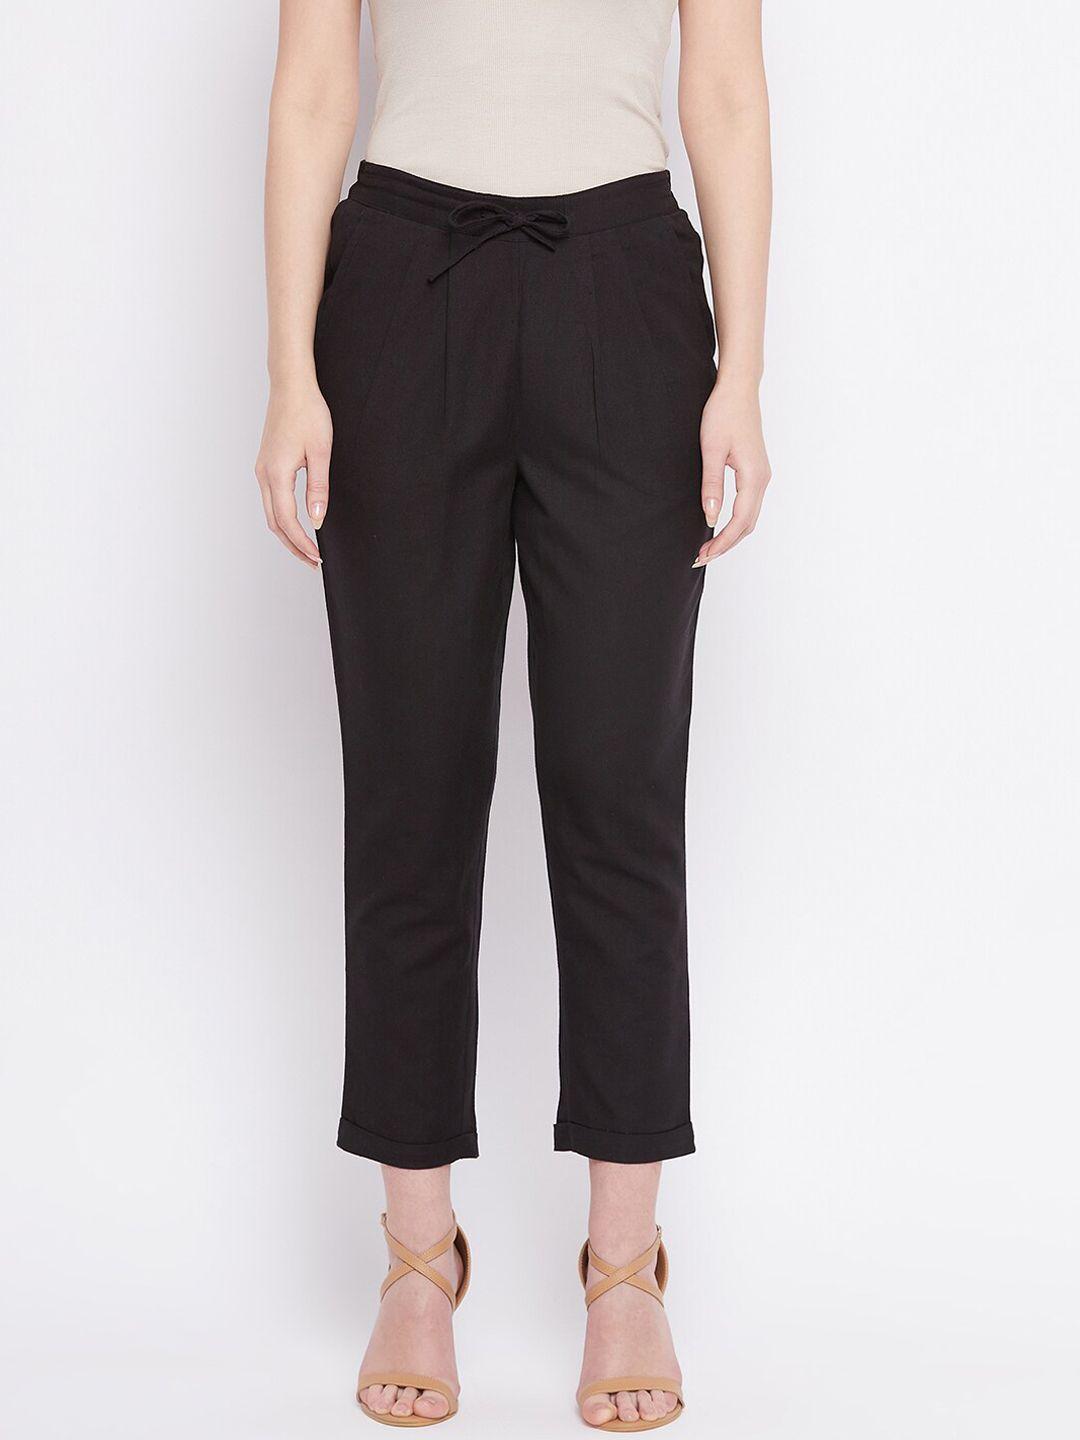 winered-women-black-regular-fit-pleated-trousers